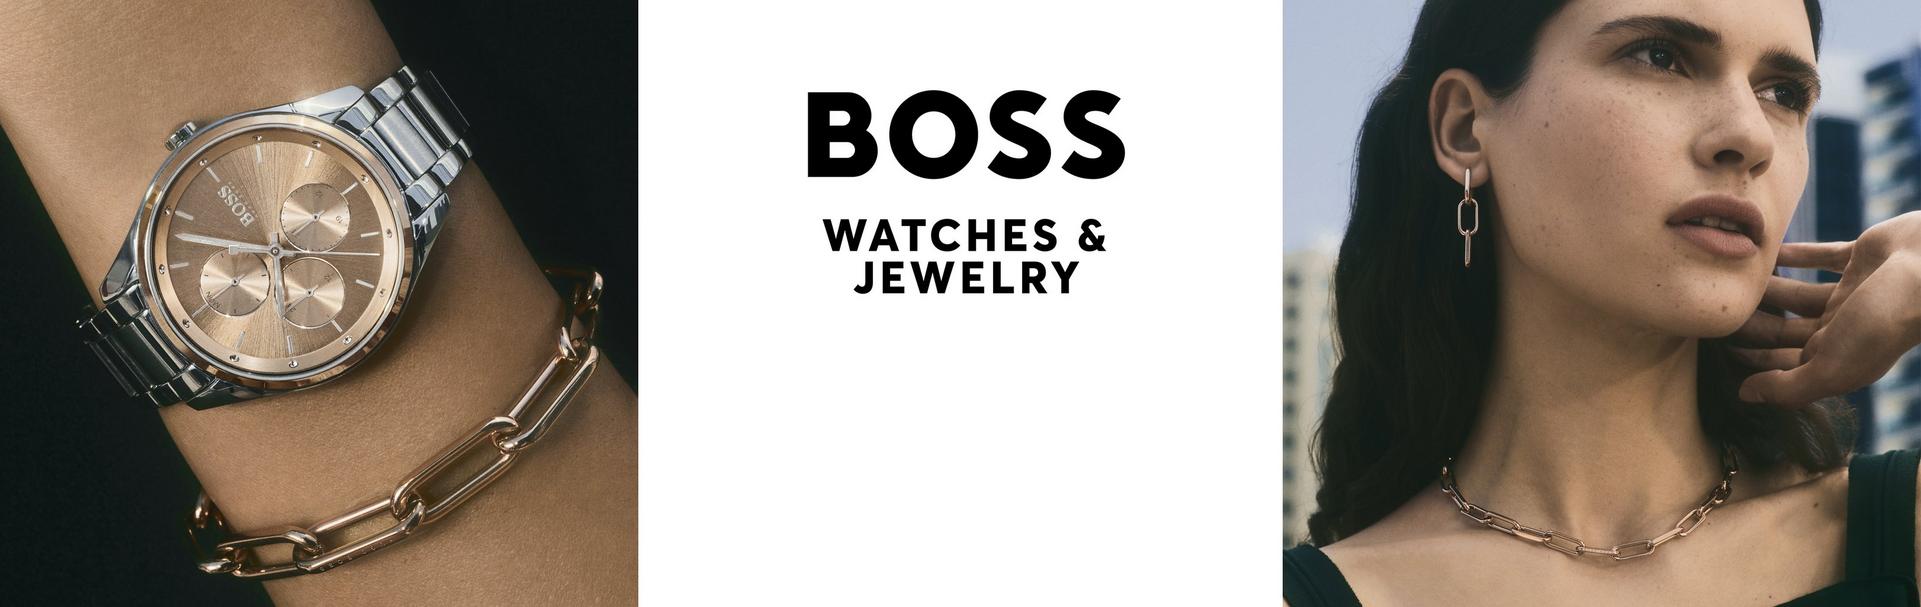 BOSS watches strikes the balance between elegance and sophistication